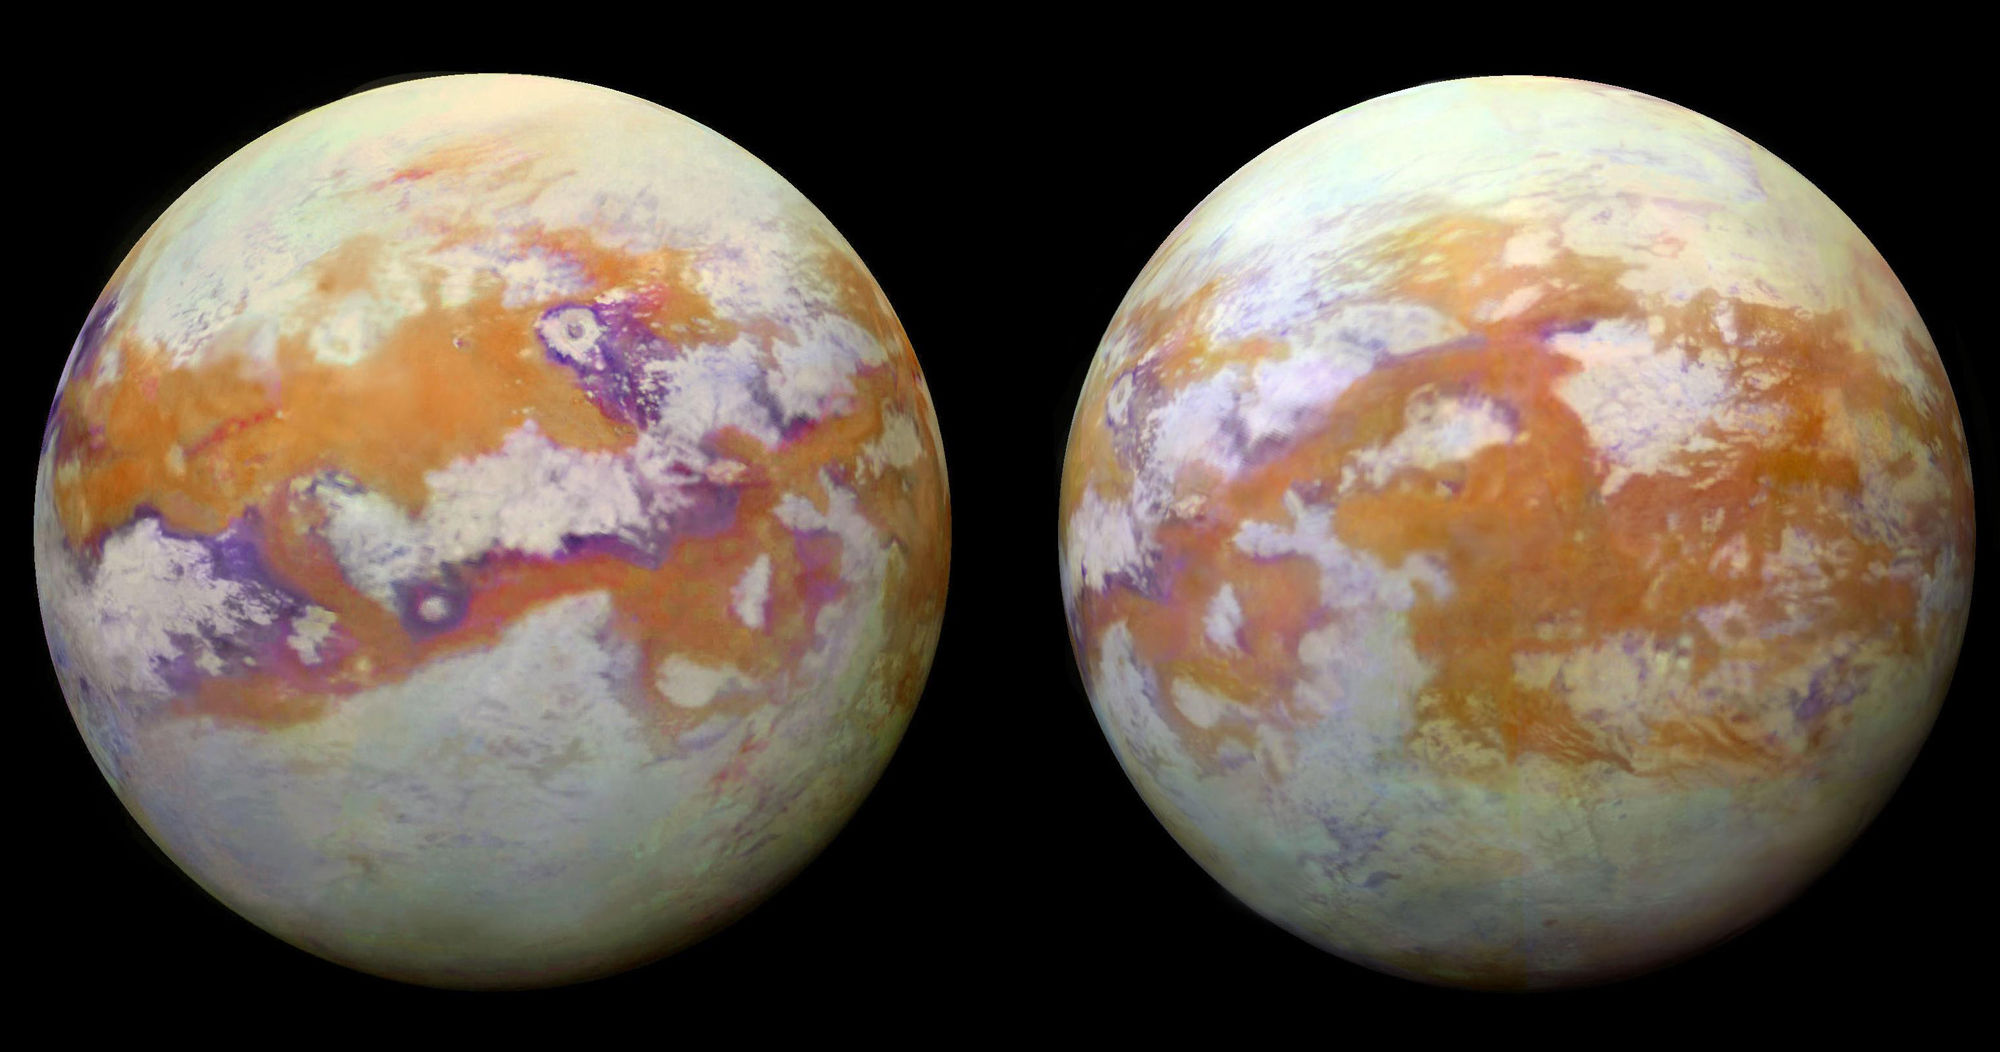 Spectacular maps of the surface of Saturn’s huge moon Titan crated using infrared images from Cassini that can see the surface through the thick atmospheric haze. Credit: NASA/JPL-Caltech/University of Nantes/University of Arizona